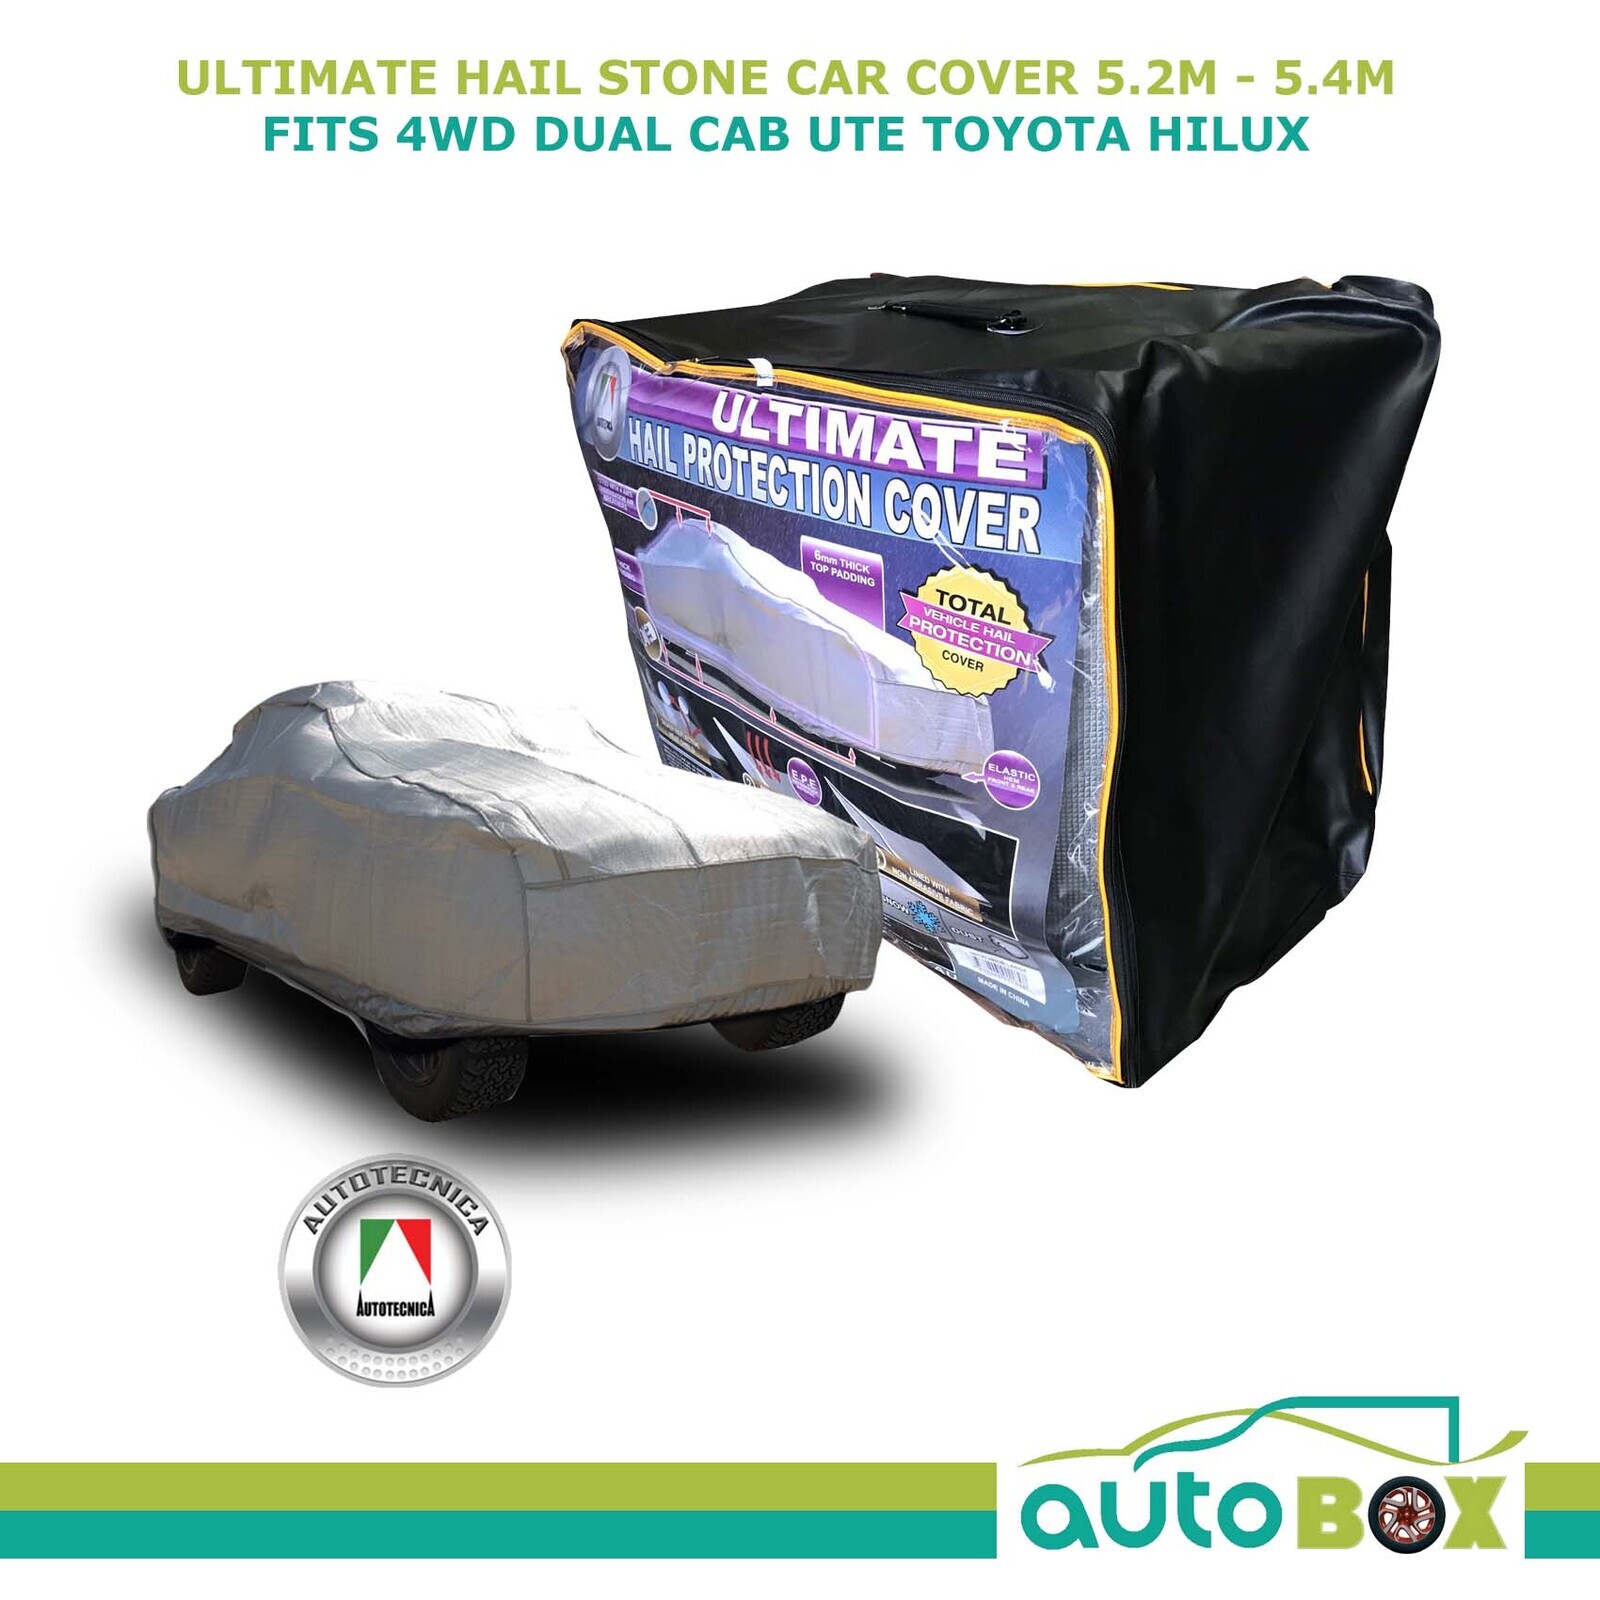 Hail protection cover Toyota C-HR - COVERLUX Maxi Protection